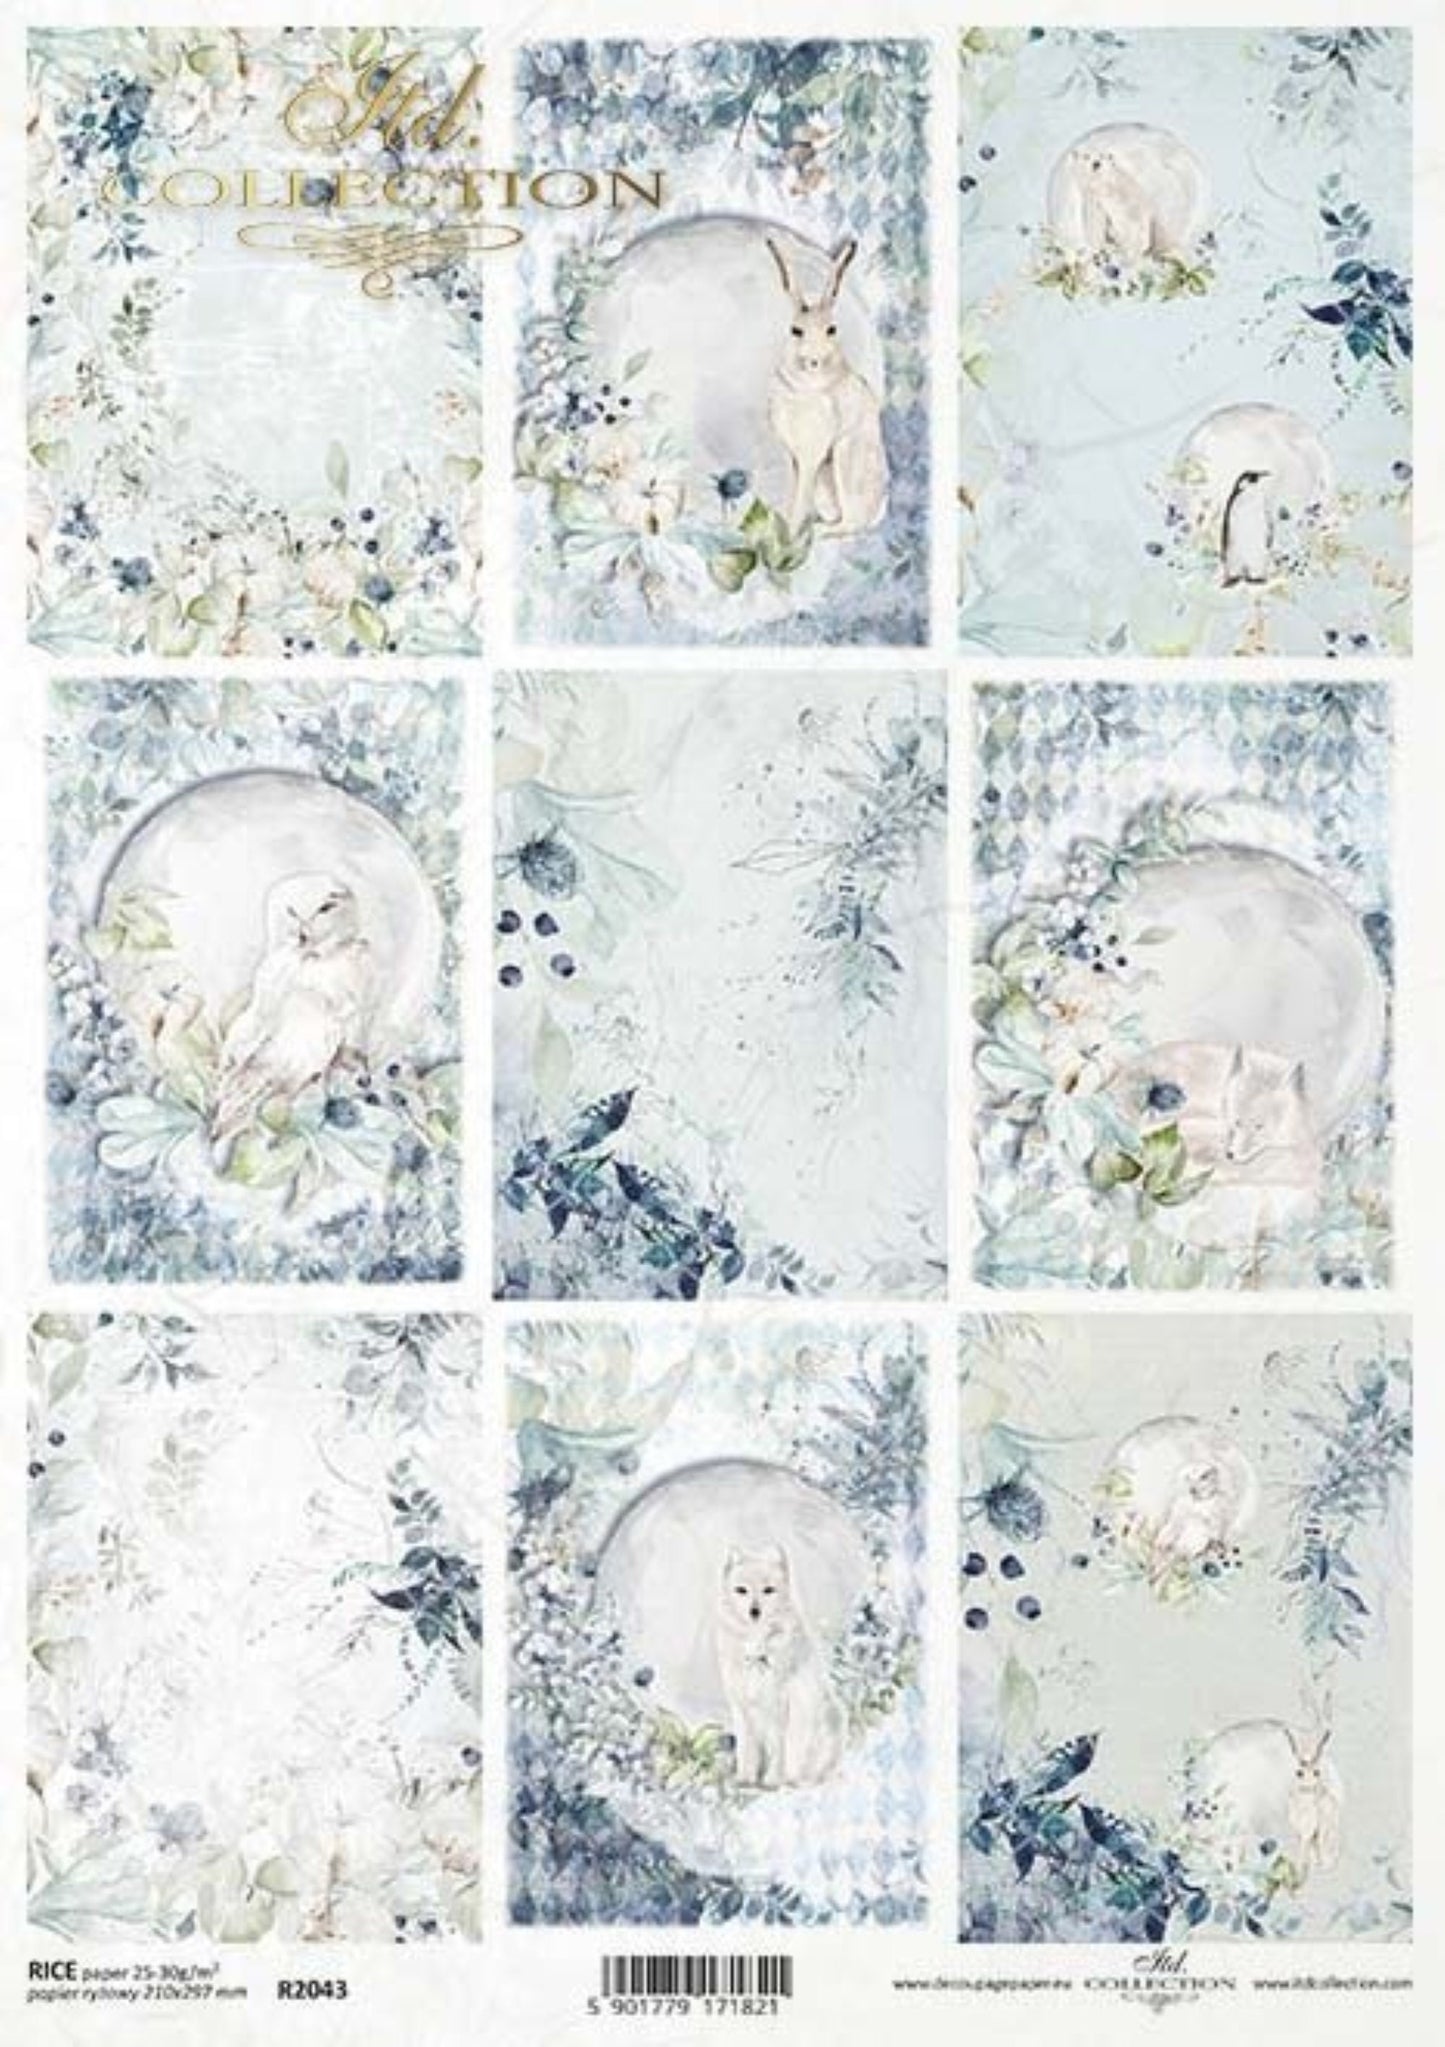 ITD Collection Rice Paper for Decoupage R2043 Size A4 - 210x297 mm, 8.27x11.7 inch, Arctic animals, polar bear, penguin, fox, owl, squares